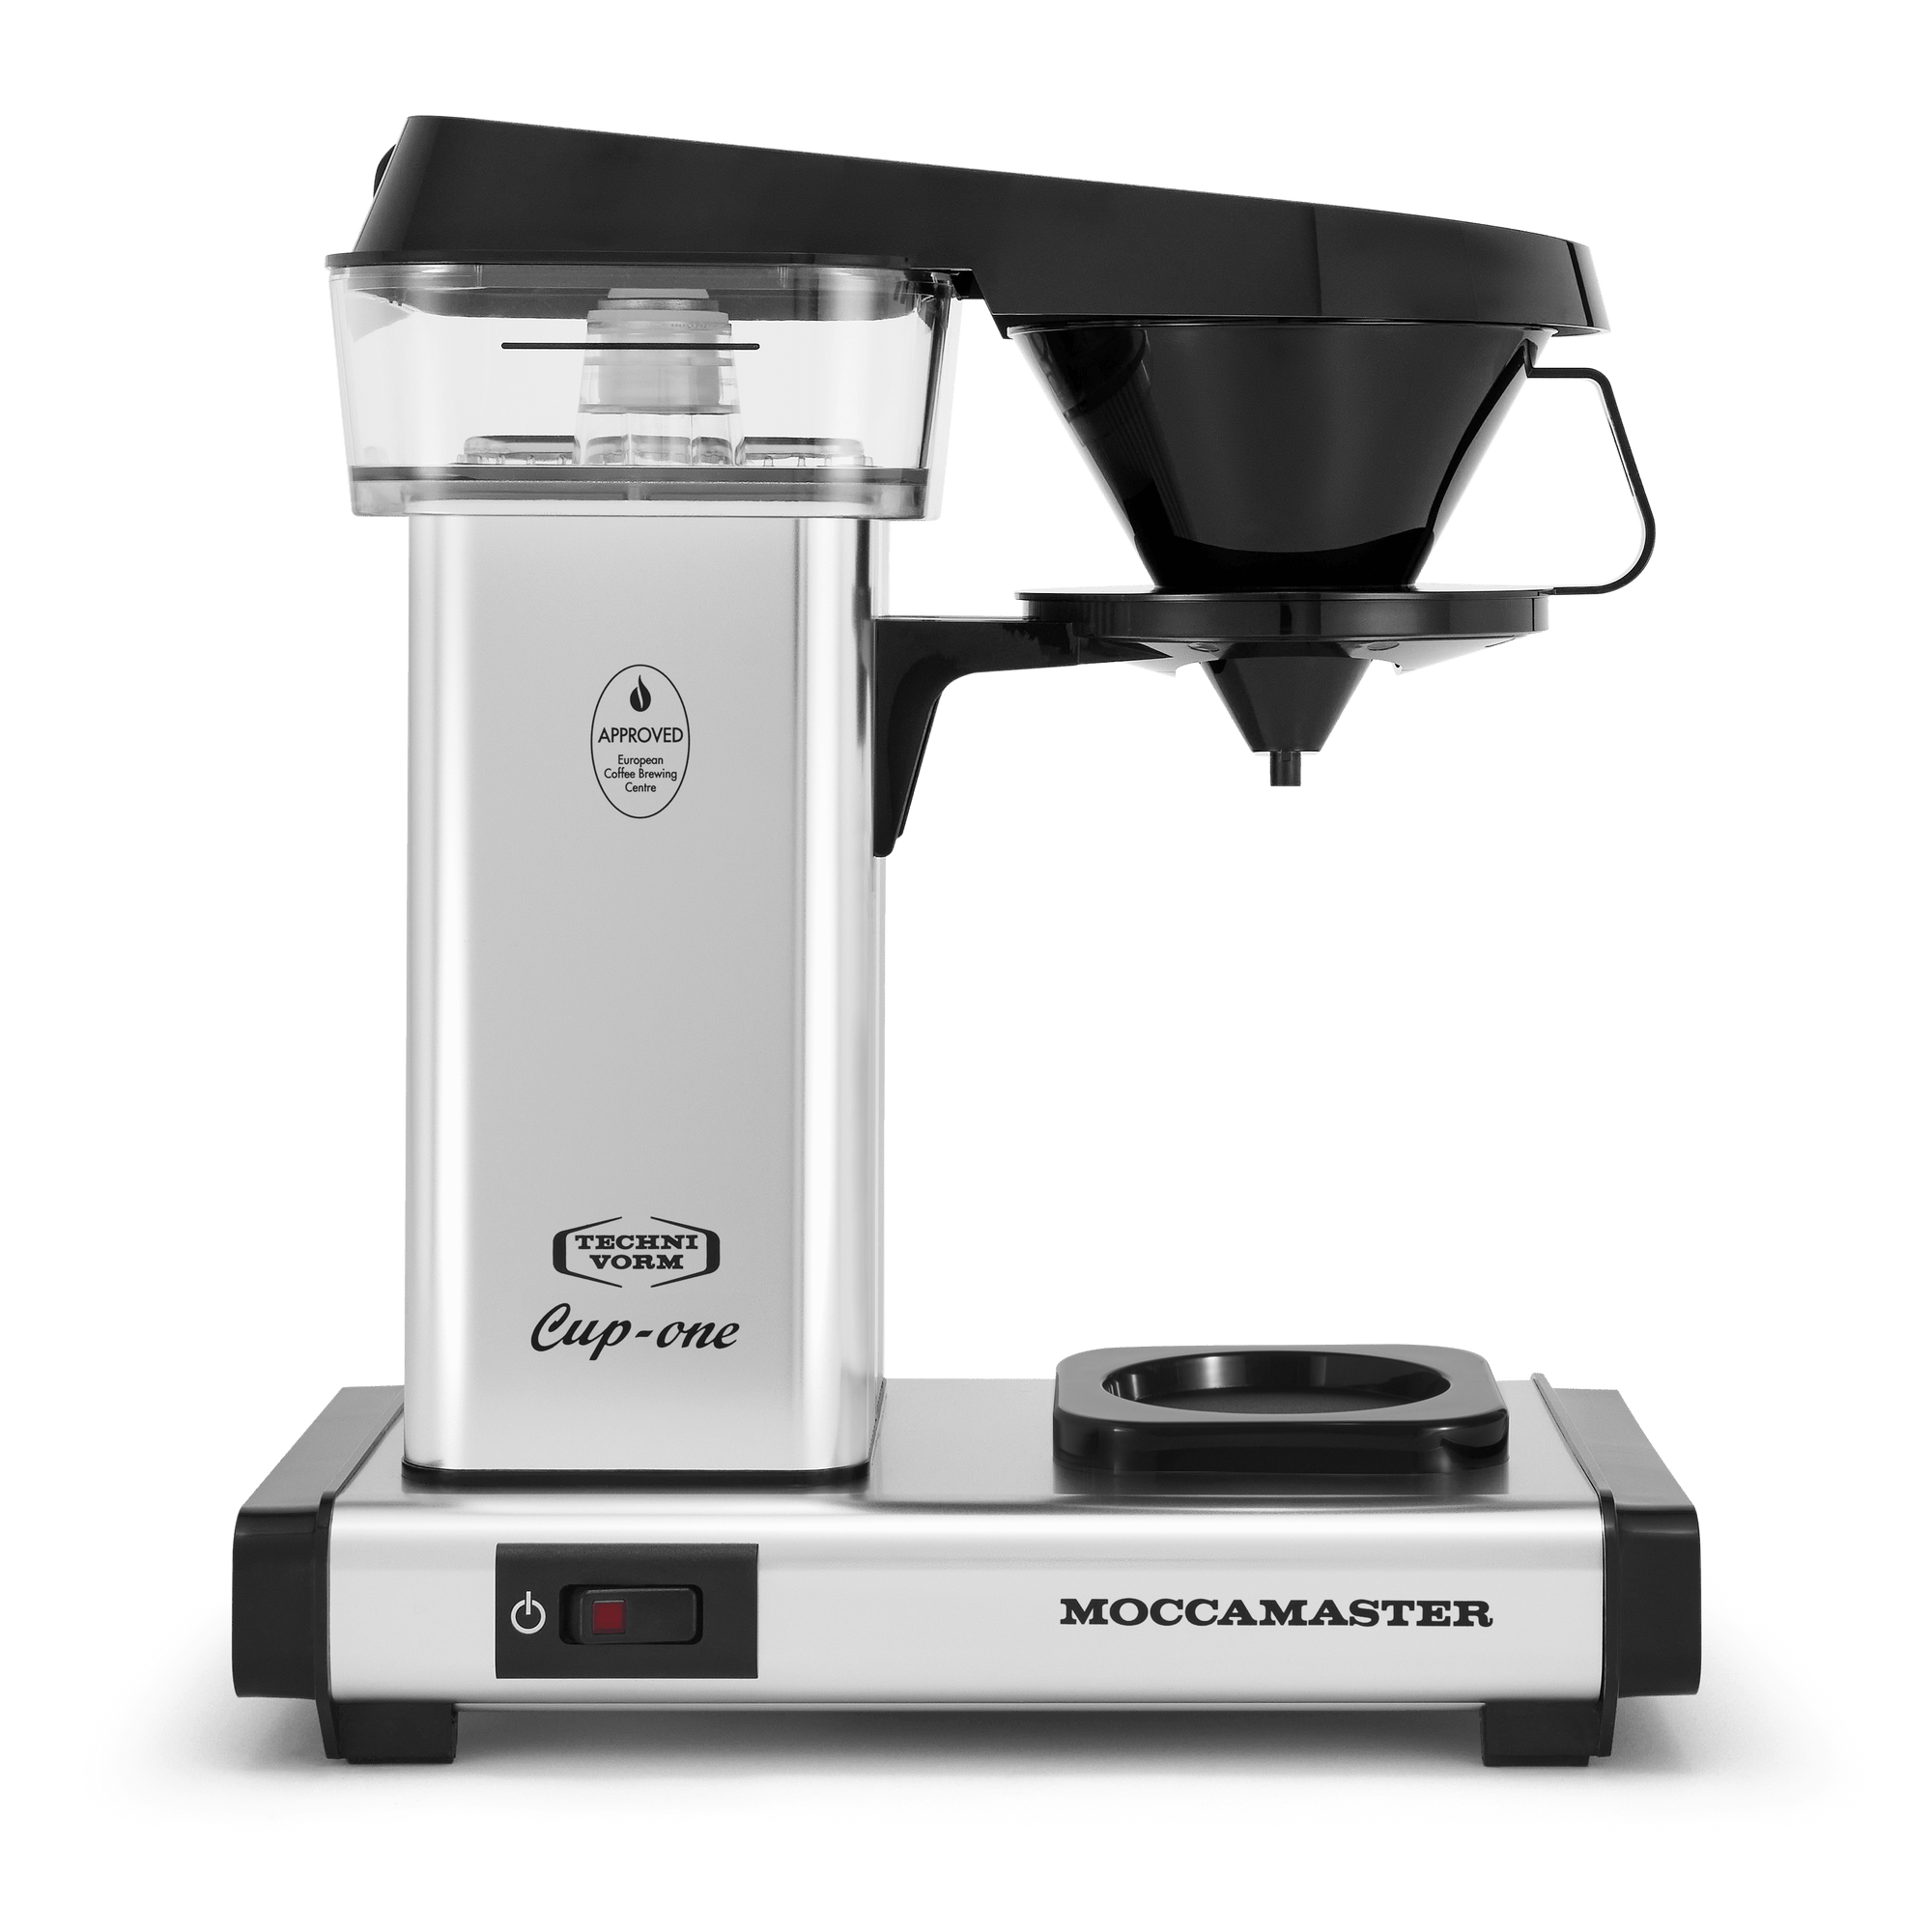 Moccamaster Cup-one Front - silver single cup coffee brewer, with rectangular body and base, clear acrylic water reservoir,  a black removable cup holder, and auto-off power switch